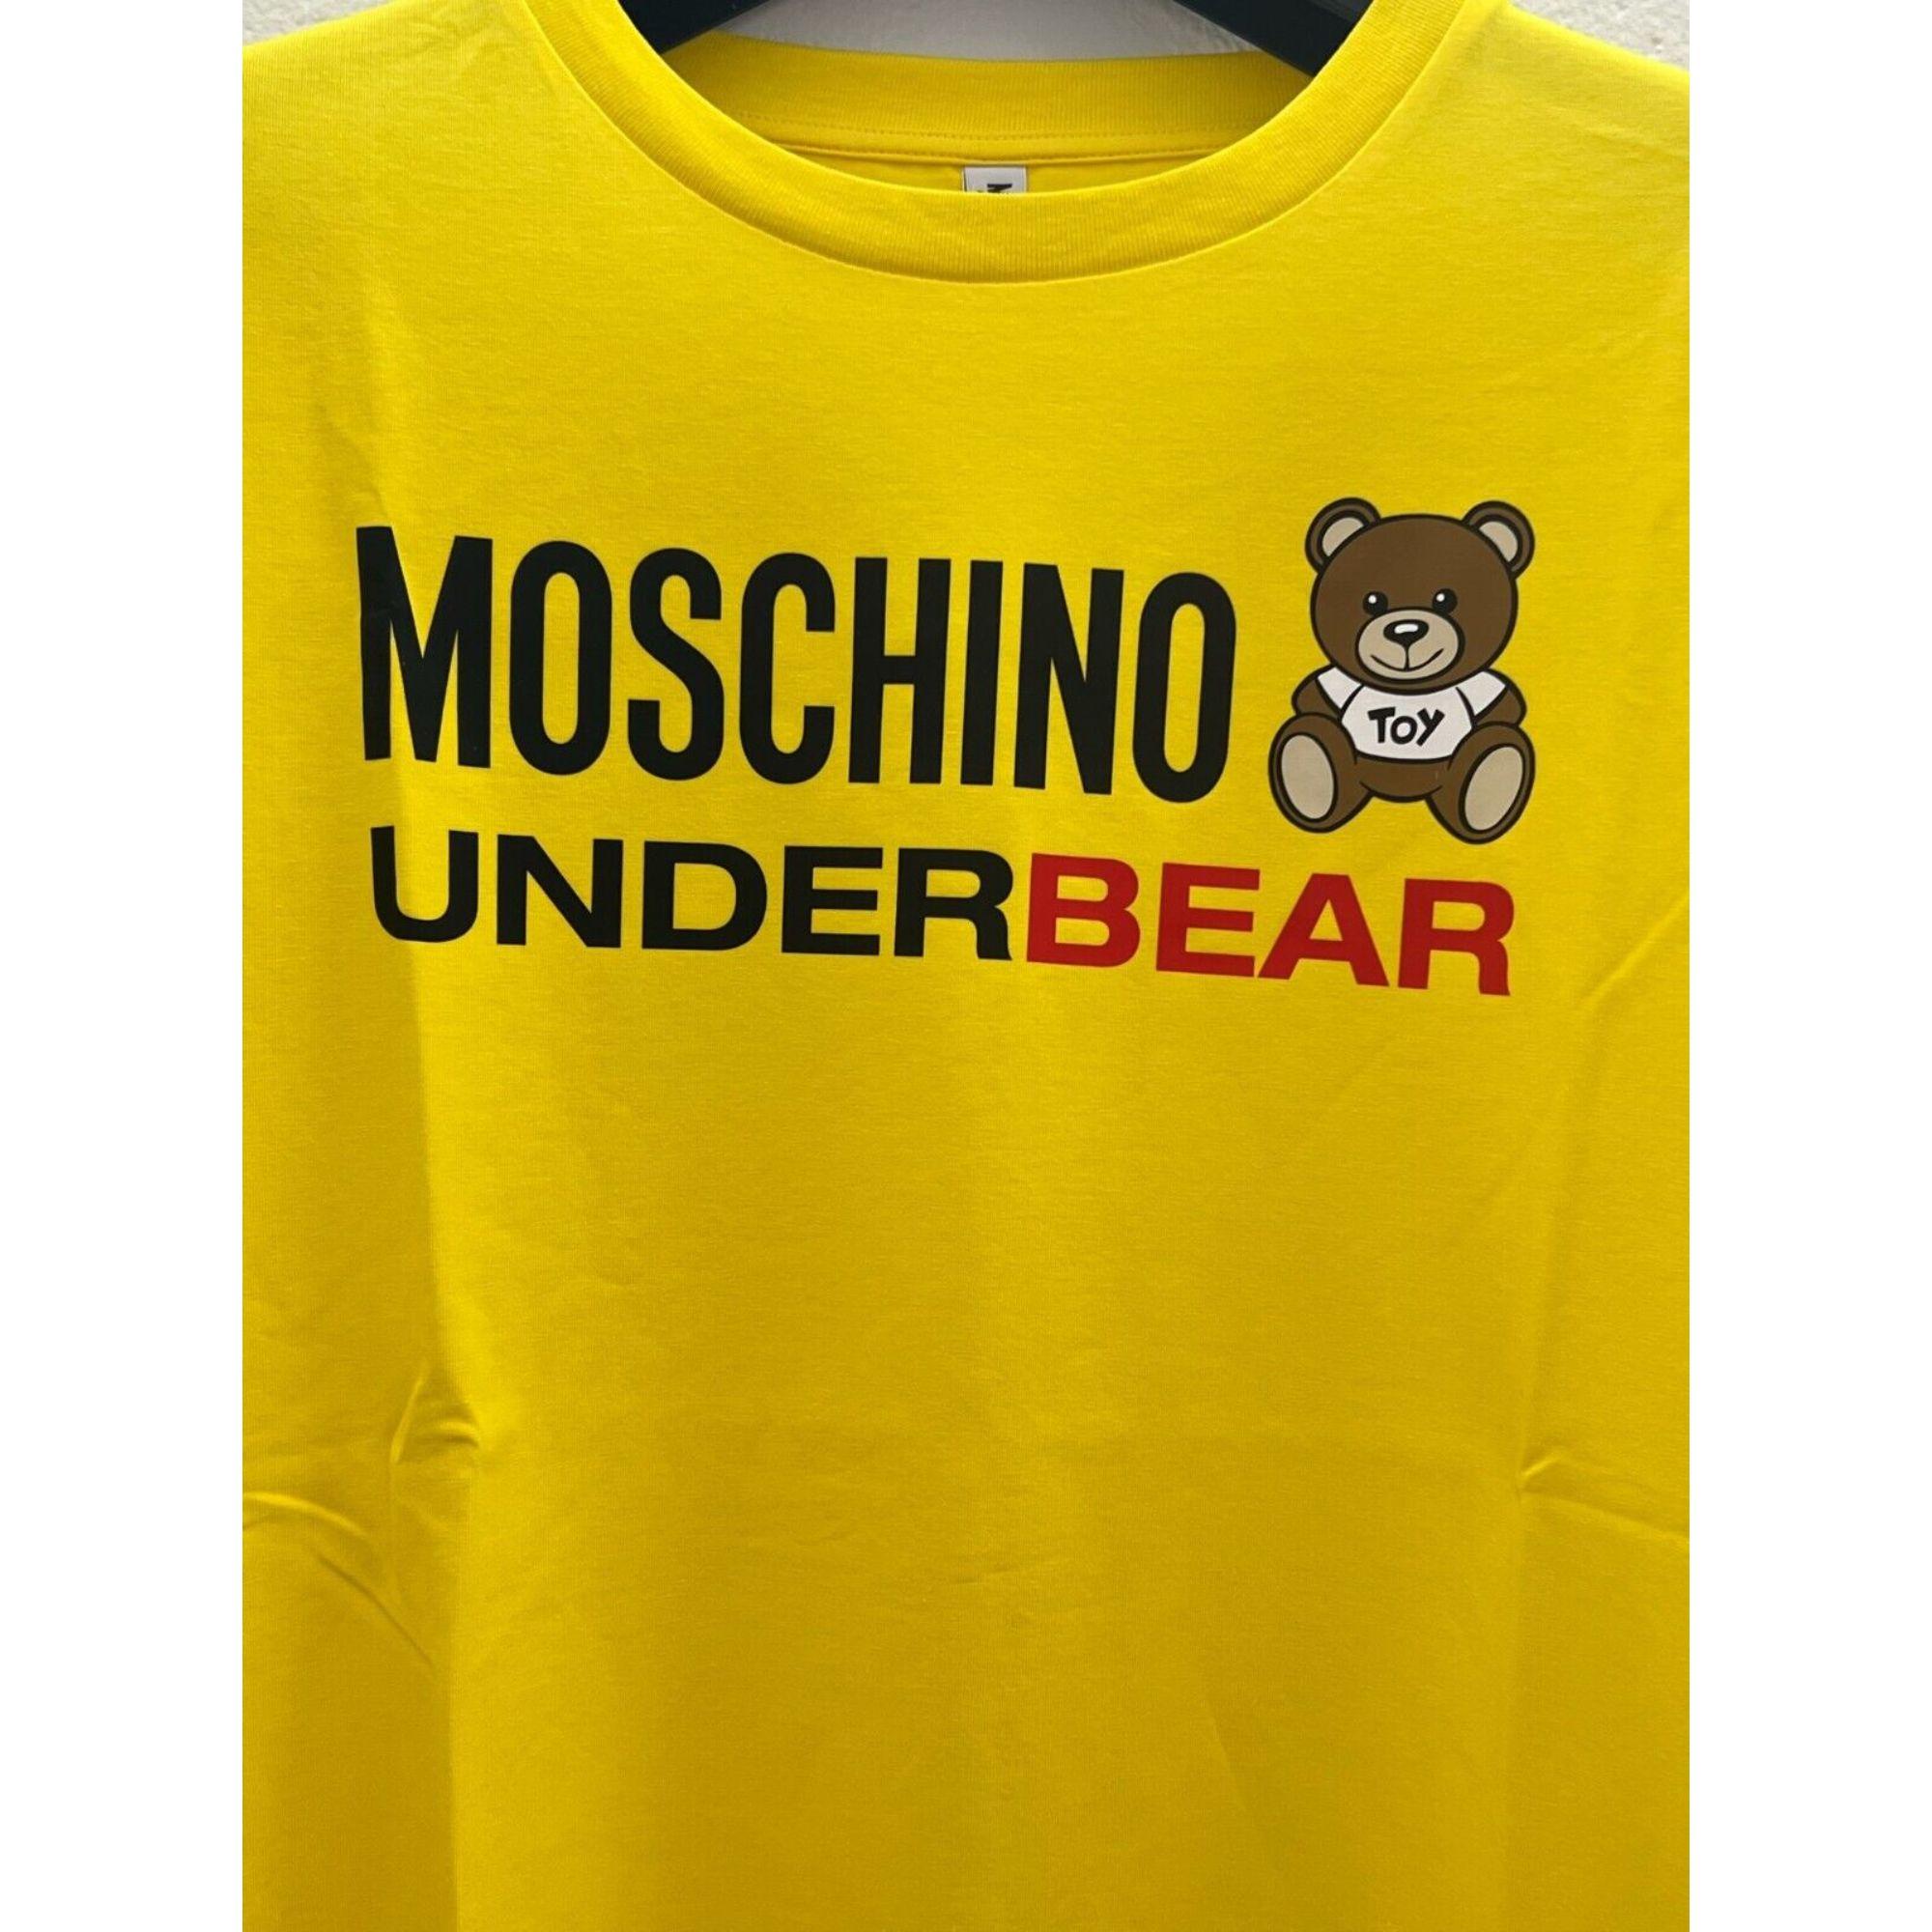 AW20 Moschino Underwear Jeremy Scott Yellow Underbear Teddy Bear Cotton T-shirt

Additional Information:
Material: 94% Cotton, 6% EA
Color: Yellow, White, Brown, Red
Size: XS / US XXS
Style: Basic
Pattern: Solid, Logo
Dimensions: Shoulder to